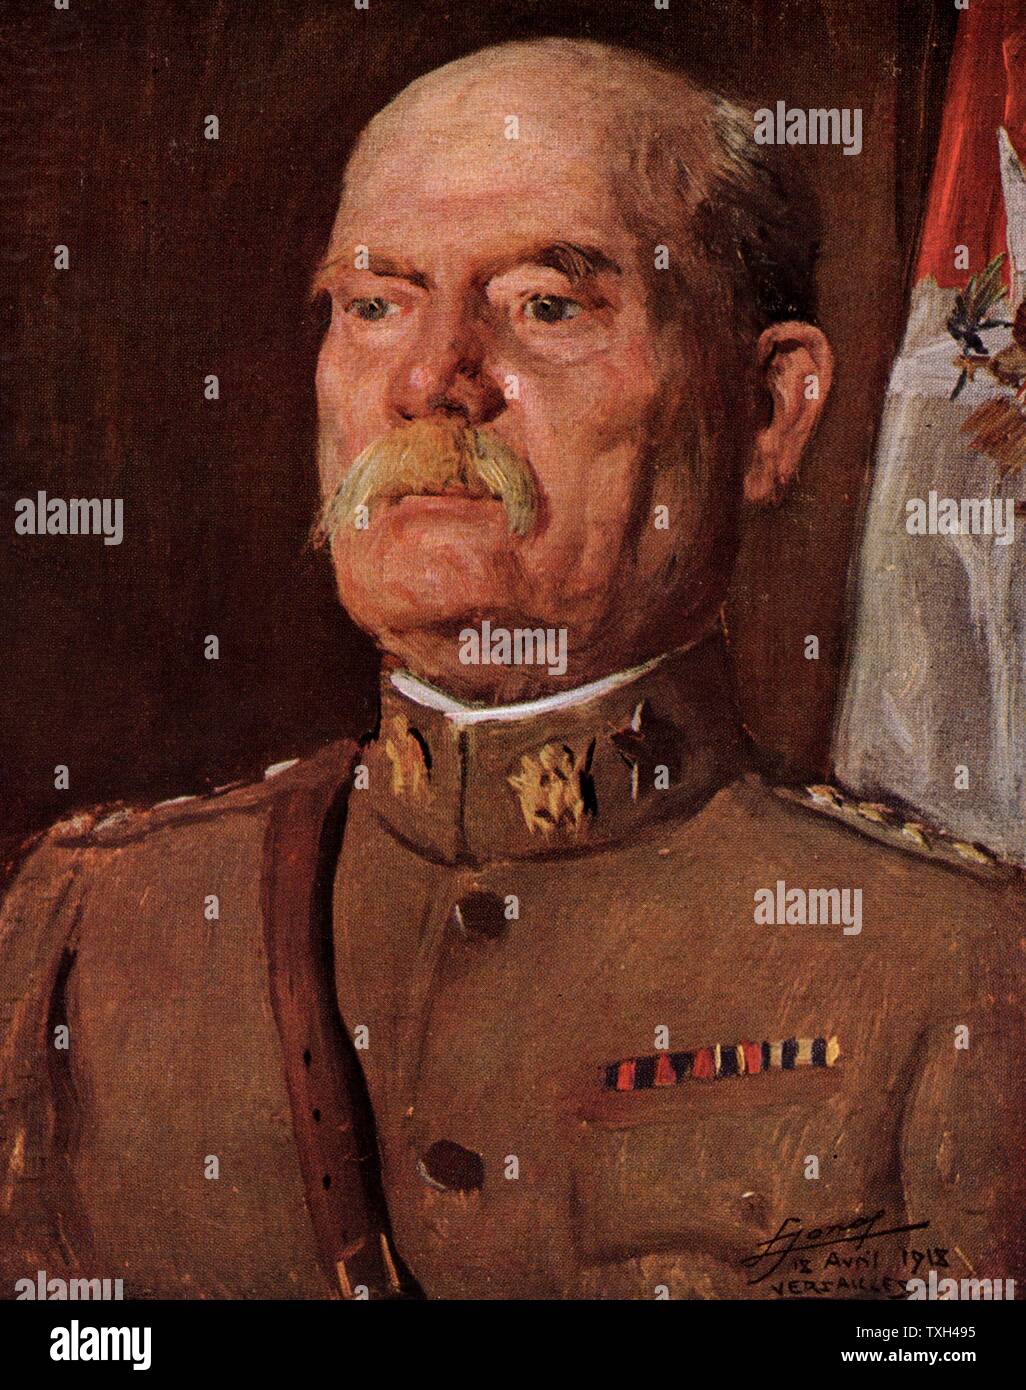 General Tasker Howard Bliss (1853-1930) American army officer. Graduated from West Point in 1875. Chief of Staff of the US Army from September 1917 to May 1918. A delegate to the Versailles Peace Conference at the end of the First World War. Bliss in April 1919. Stock Photo